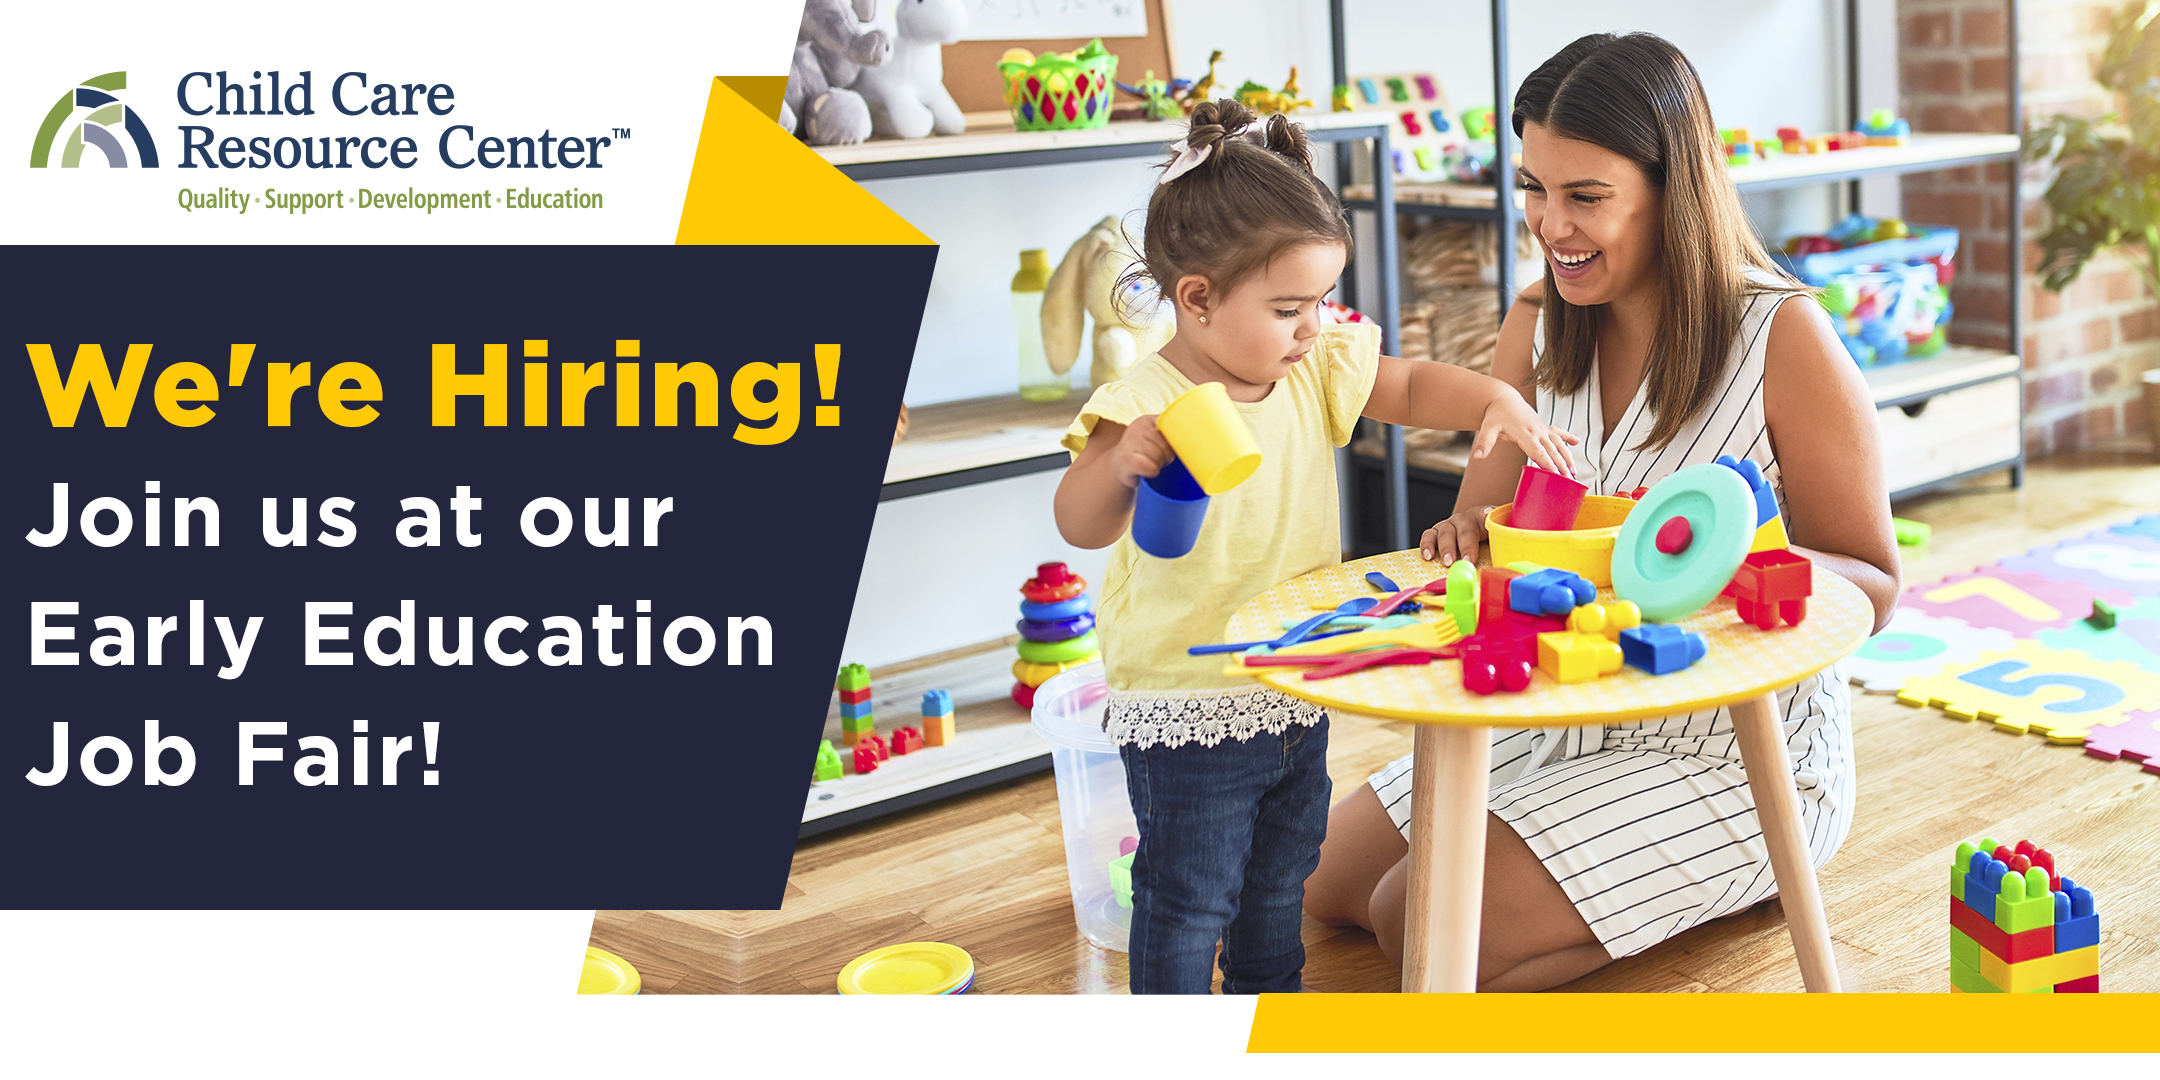 A promotional image for CCRC’s Early Education job fair featuring an image of a female teacher and female child at a preschool playing on the table and the headline “We’re Hiring”